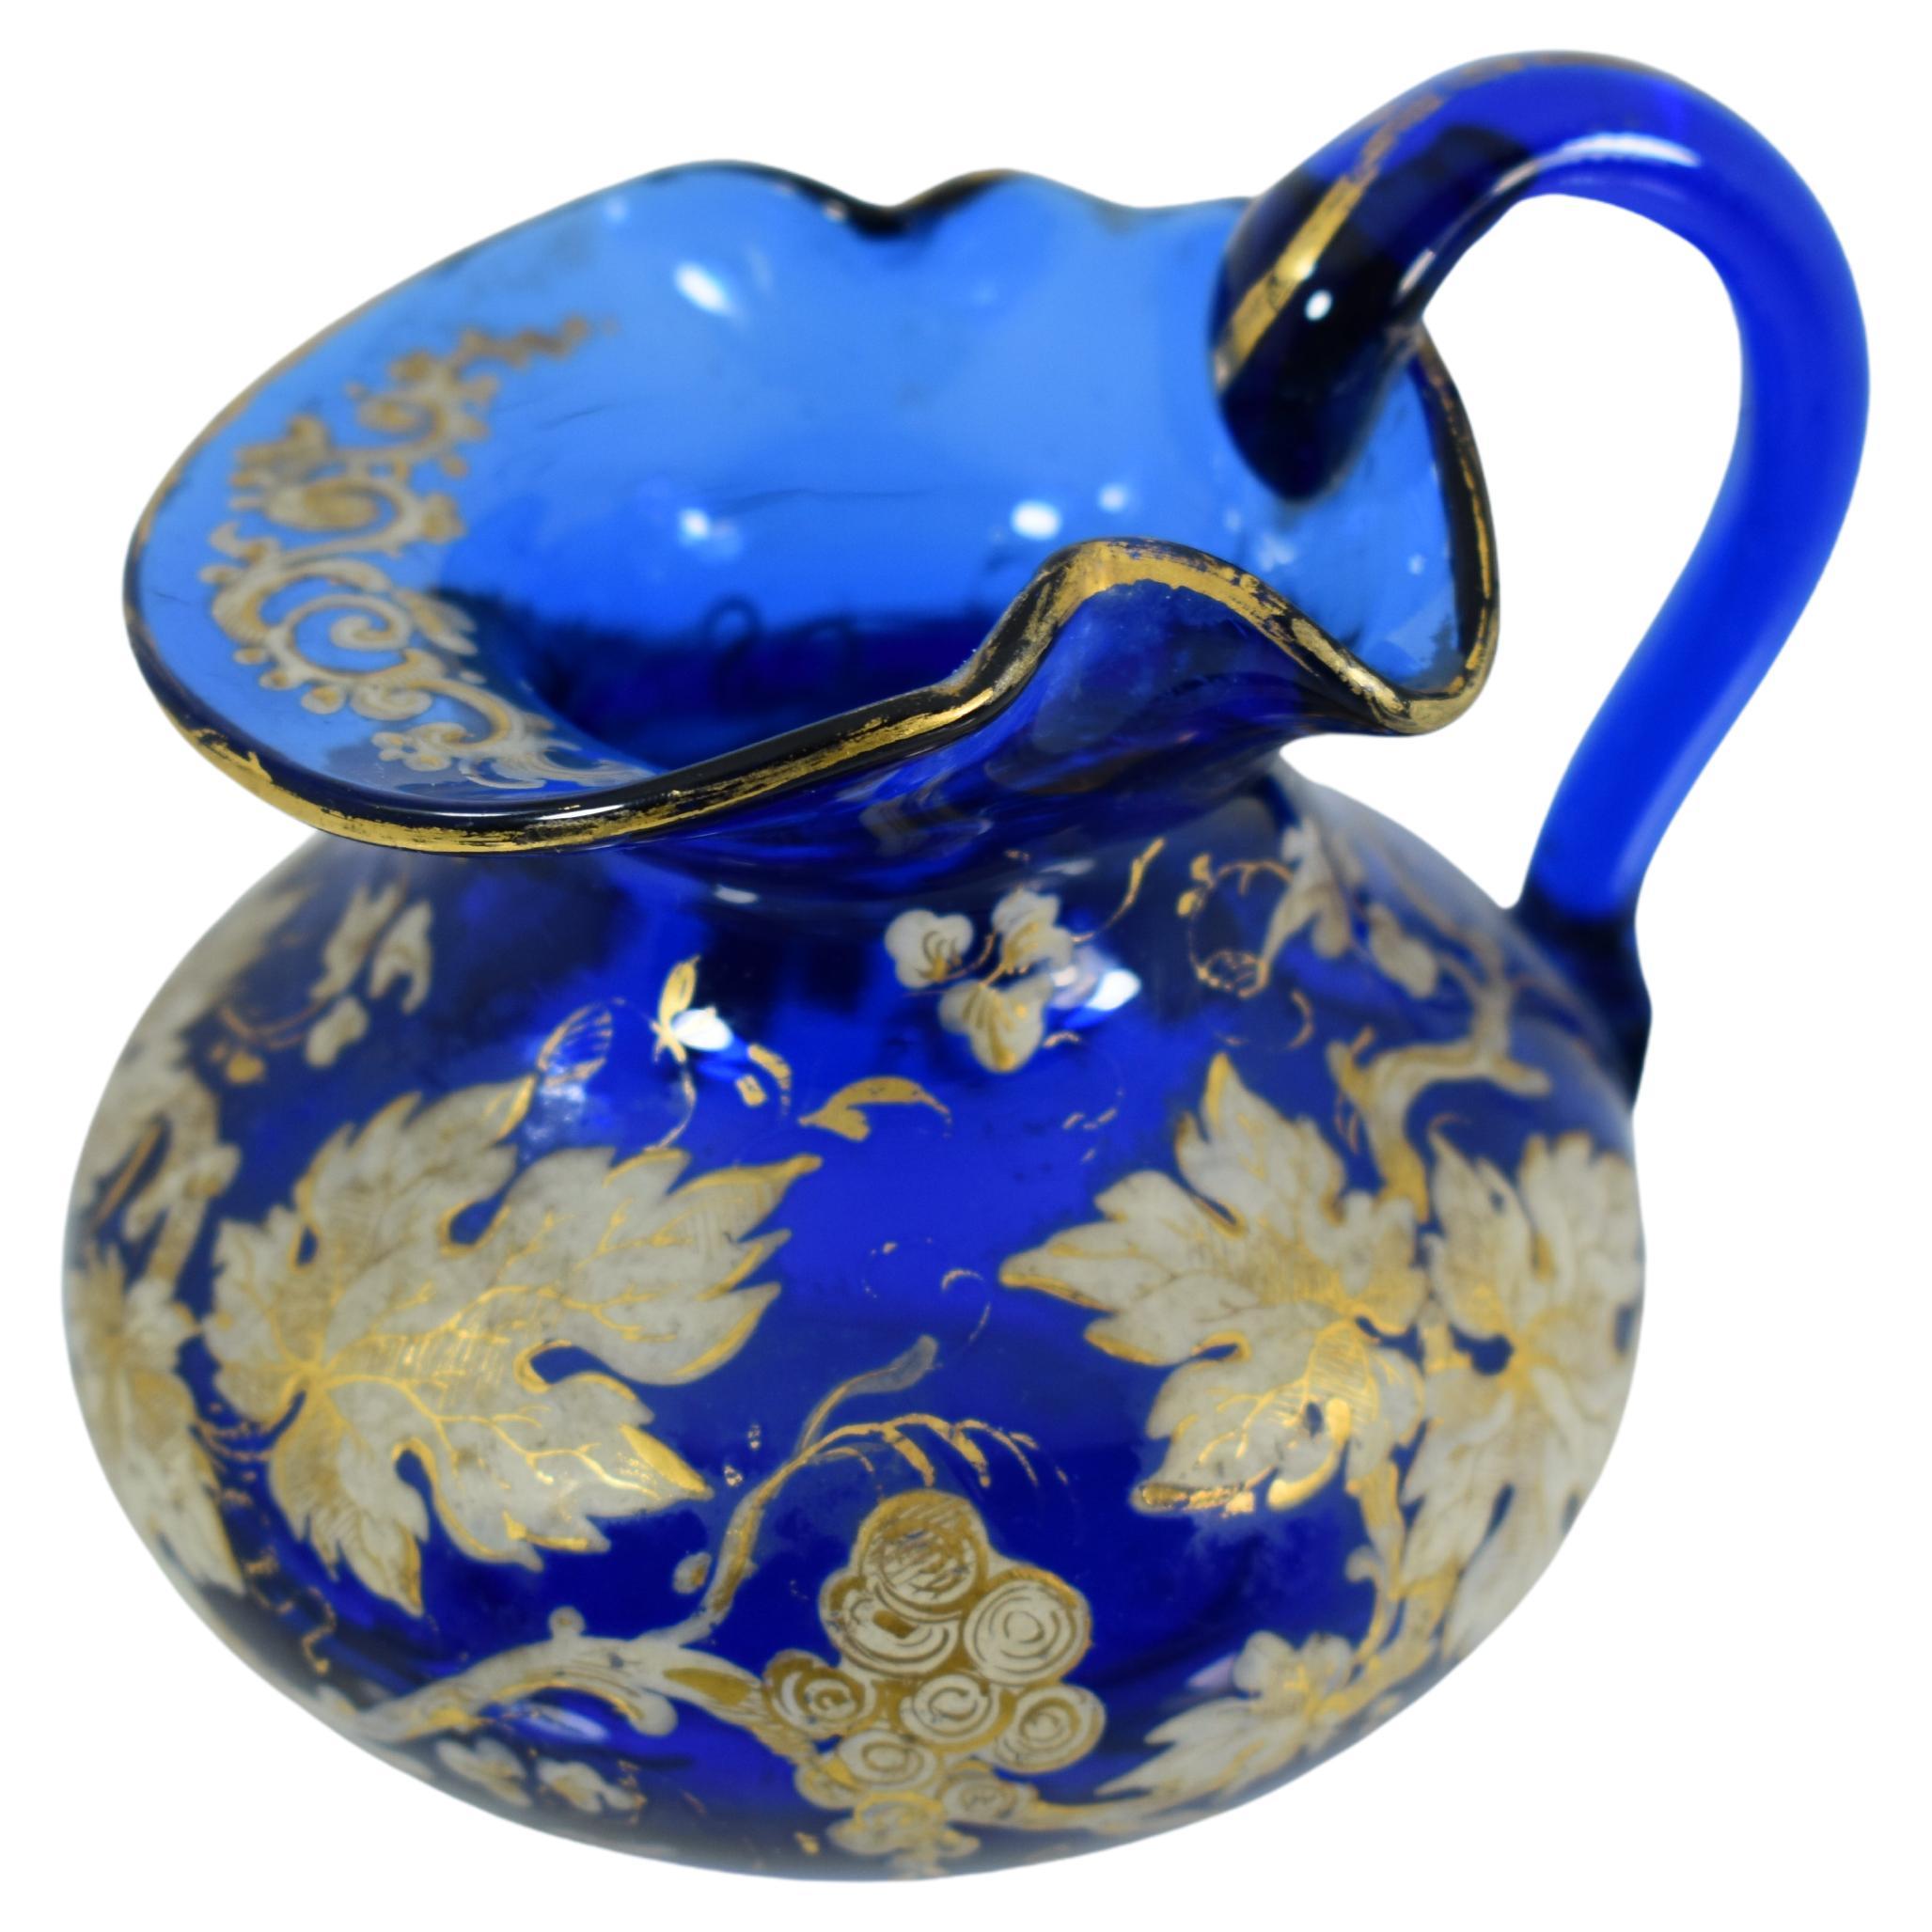 Antique Bohemian Cobalt Blue Enameled Glass Perfume Bottle and Jug, 19th Century In Good Condition For Sale In Rostock, MV